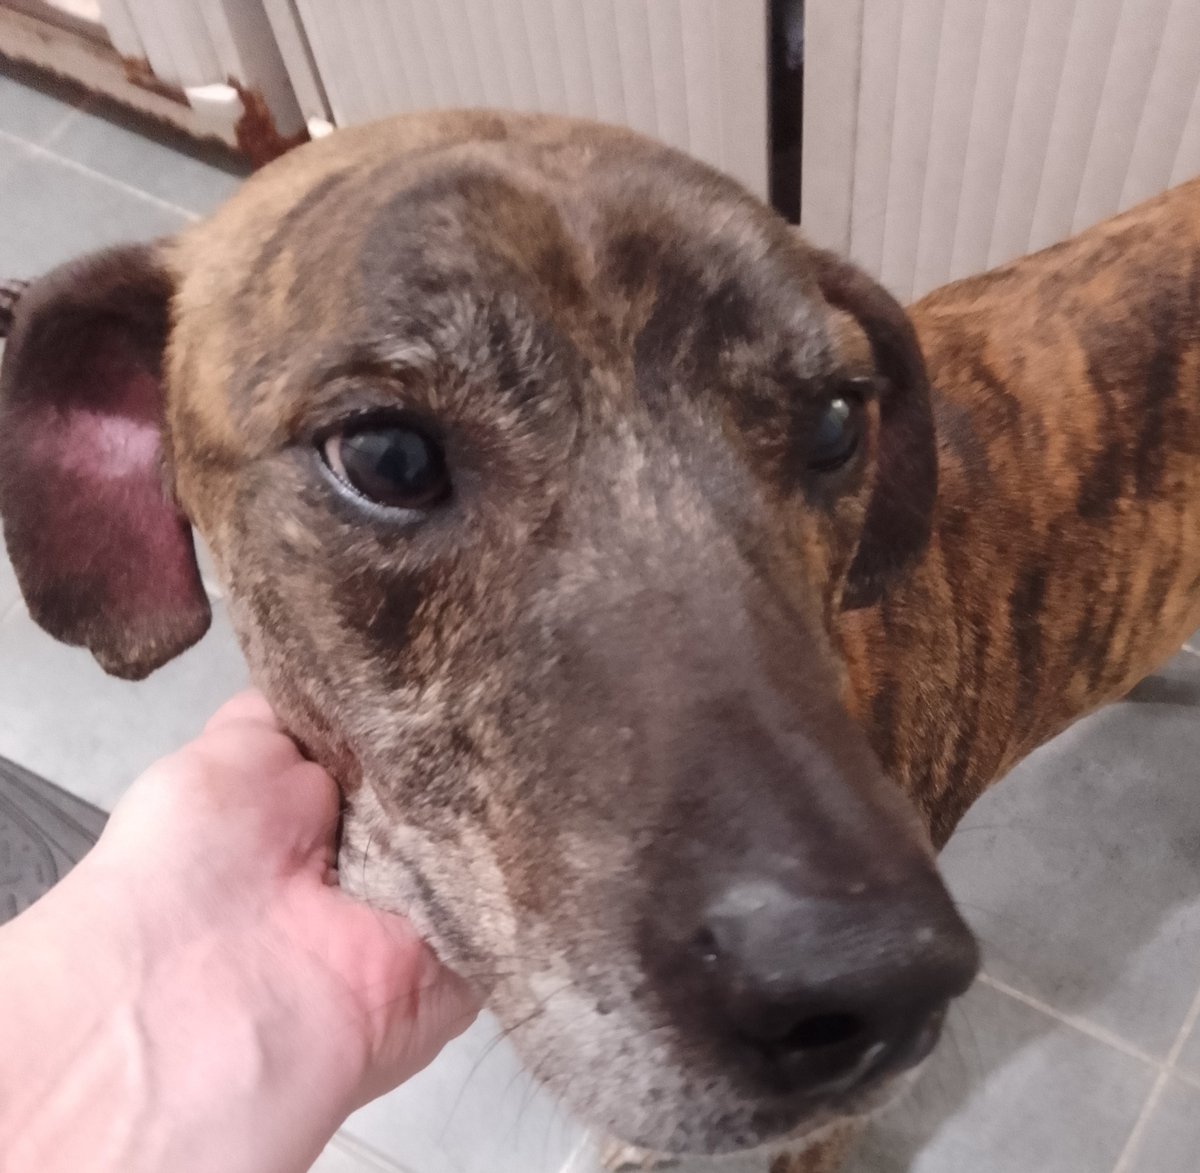 Urgent, please retweet to help find the owner or a rescue space for this stray dog, found/abandoned #GREENWICH #LONDON #UK 🆘 Male, Greyhound, he is not chipped. Found 17 May. Now in a council pound for 7 days, please share widely as he could be missing or stolen from another